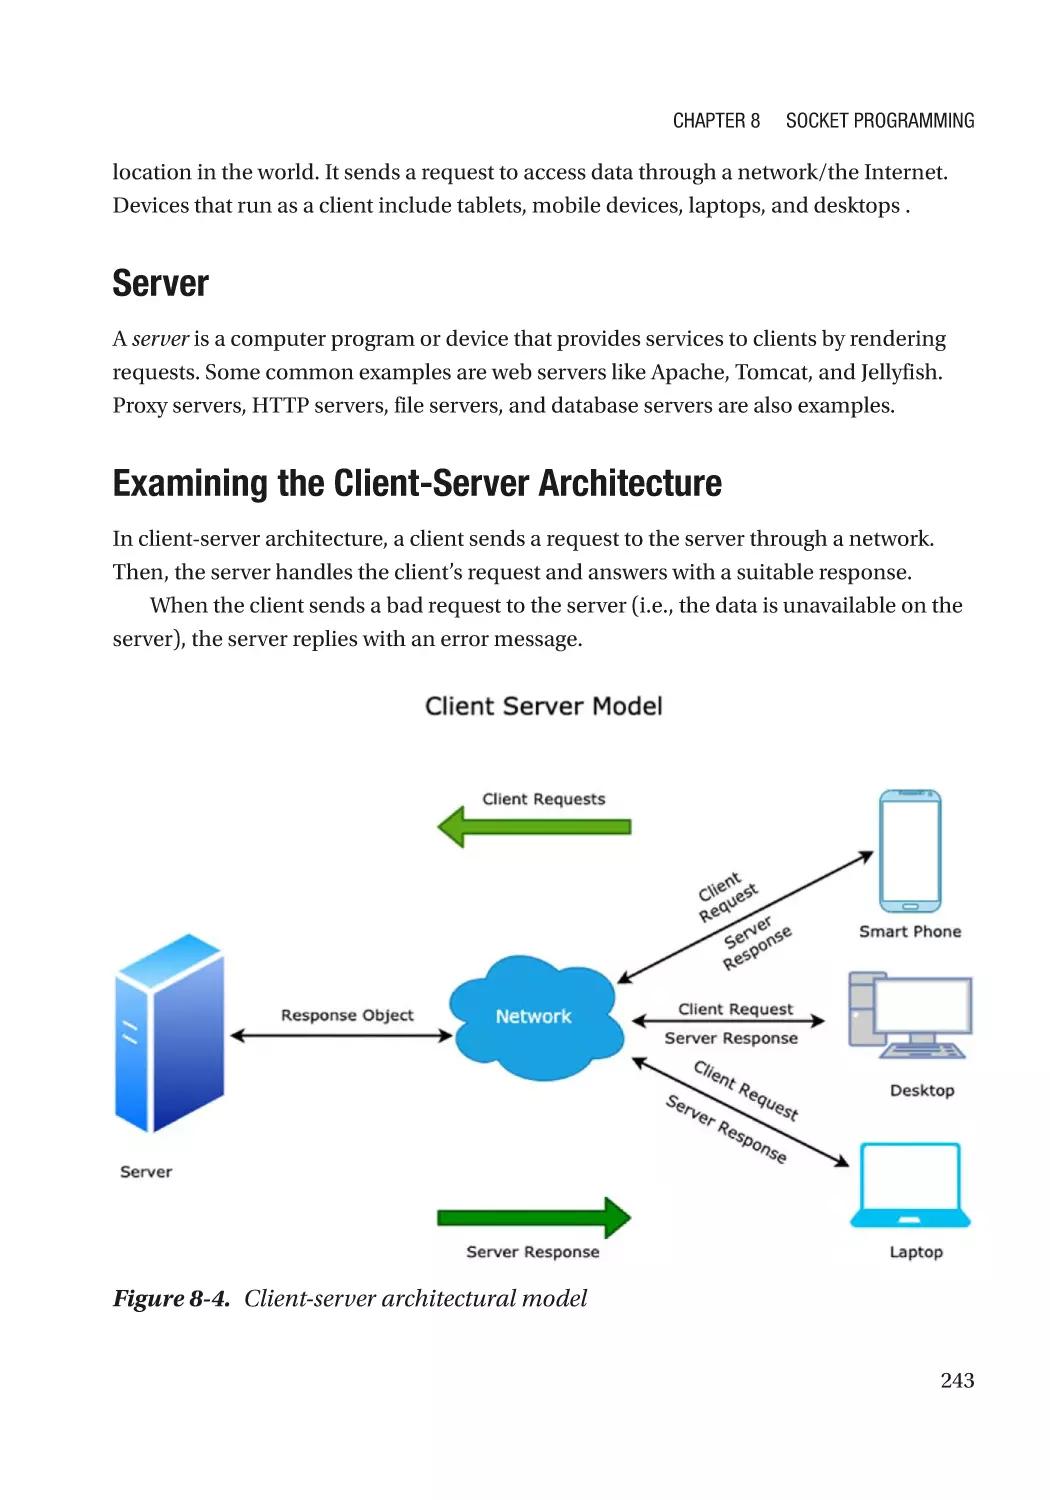 Server
Examining the Client-Server Architecture